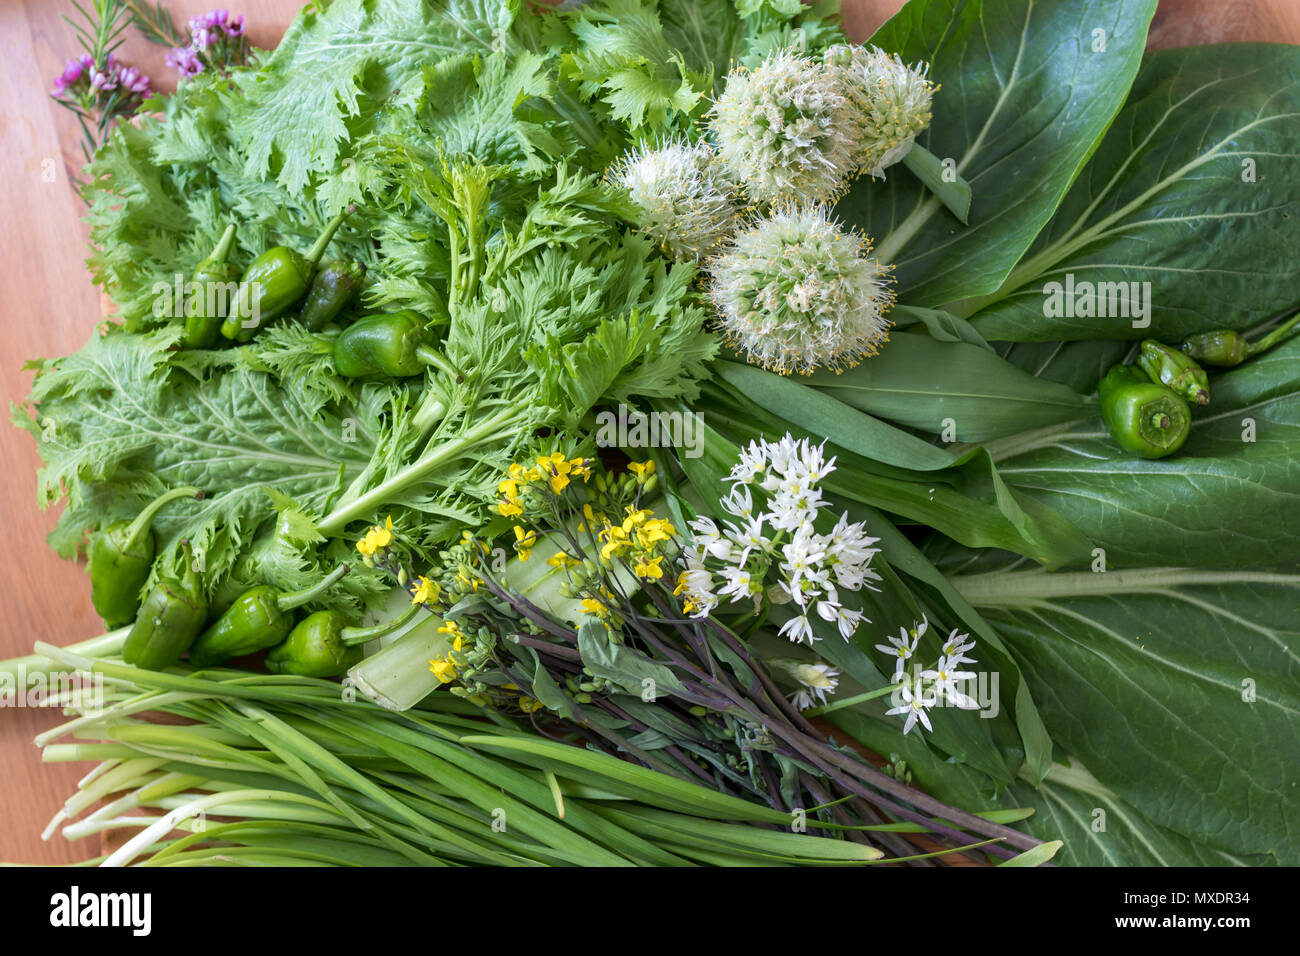 Flowering and leafy green Asian (mostly Japanese) organic vegetables. Freshly harvested and ideal for salad or stir-fry. Stock Photo